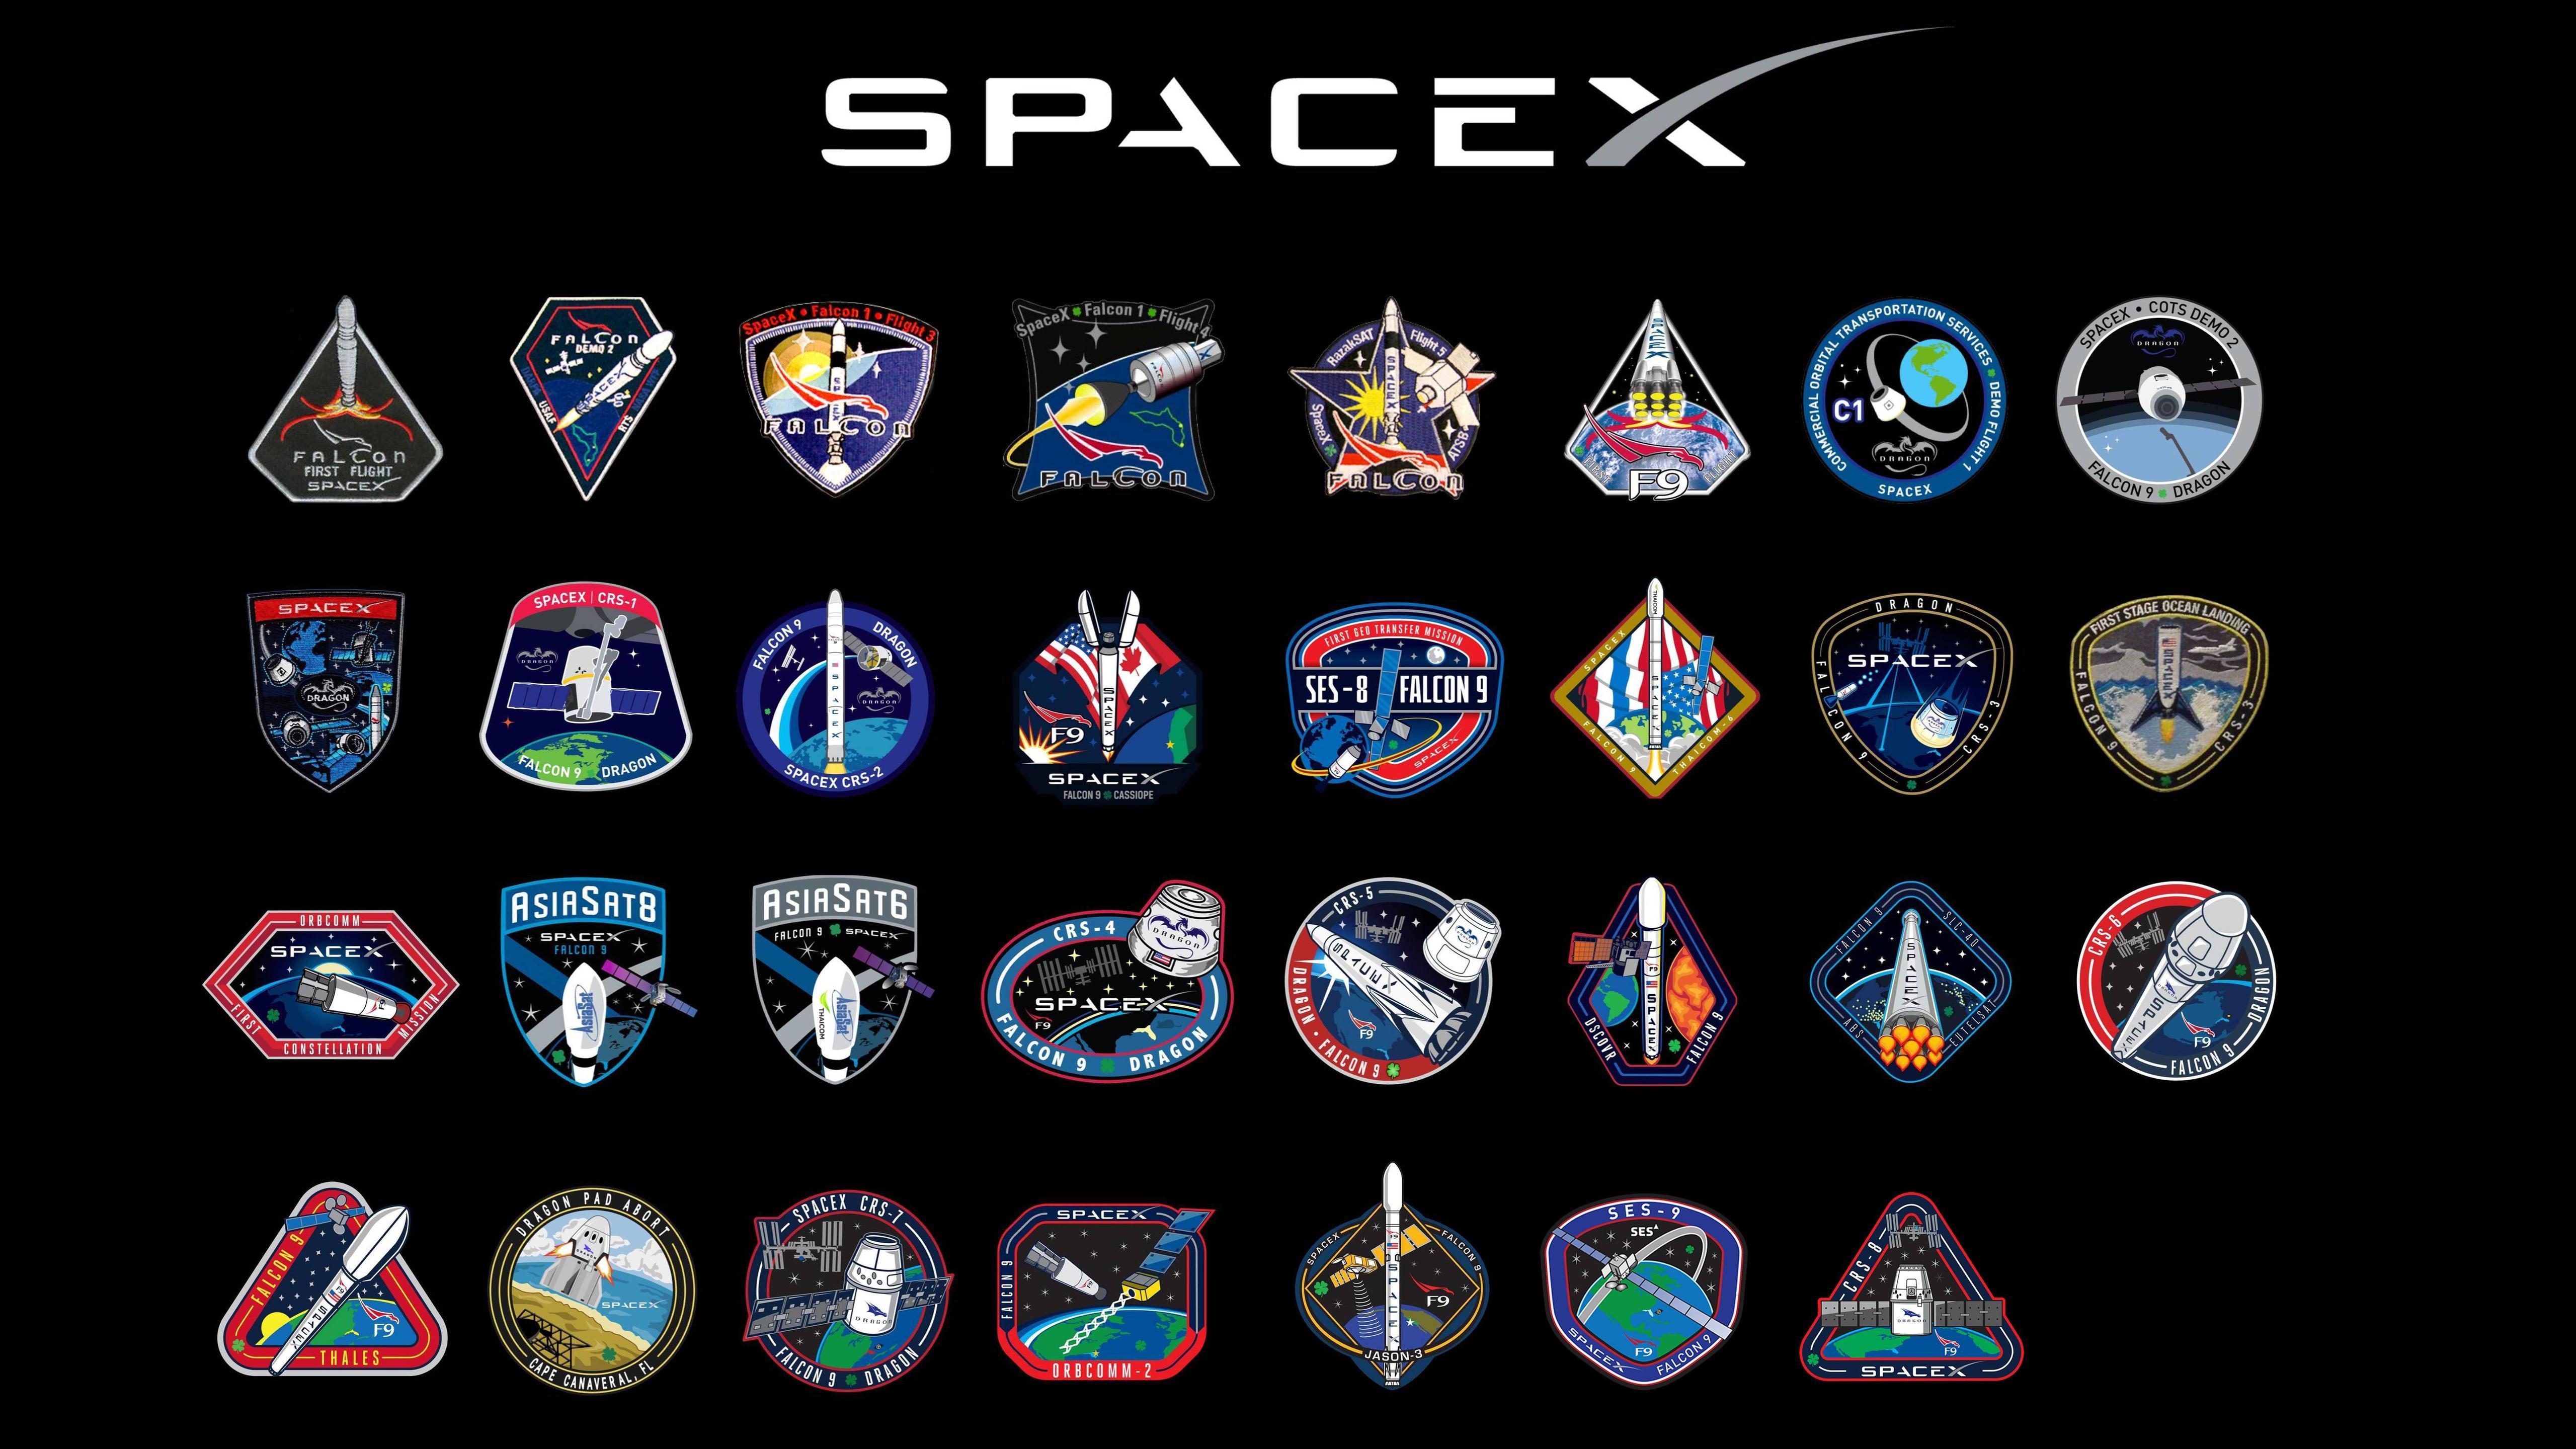 SpaceX Rocket Logo - SpaceX Mission Patch Wallpaper (16:9)